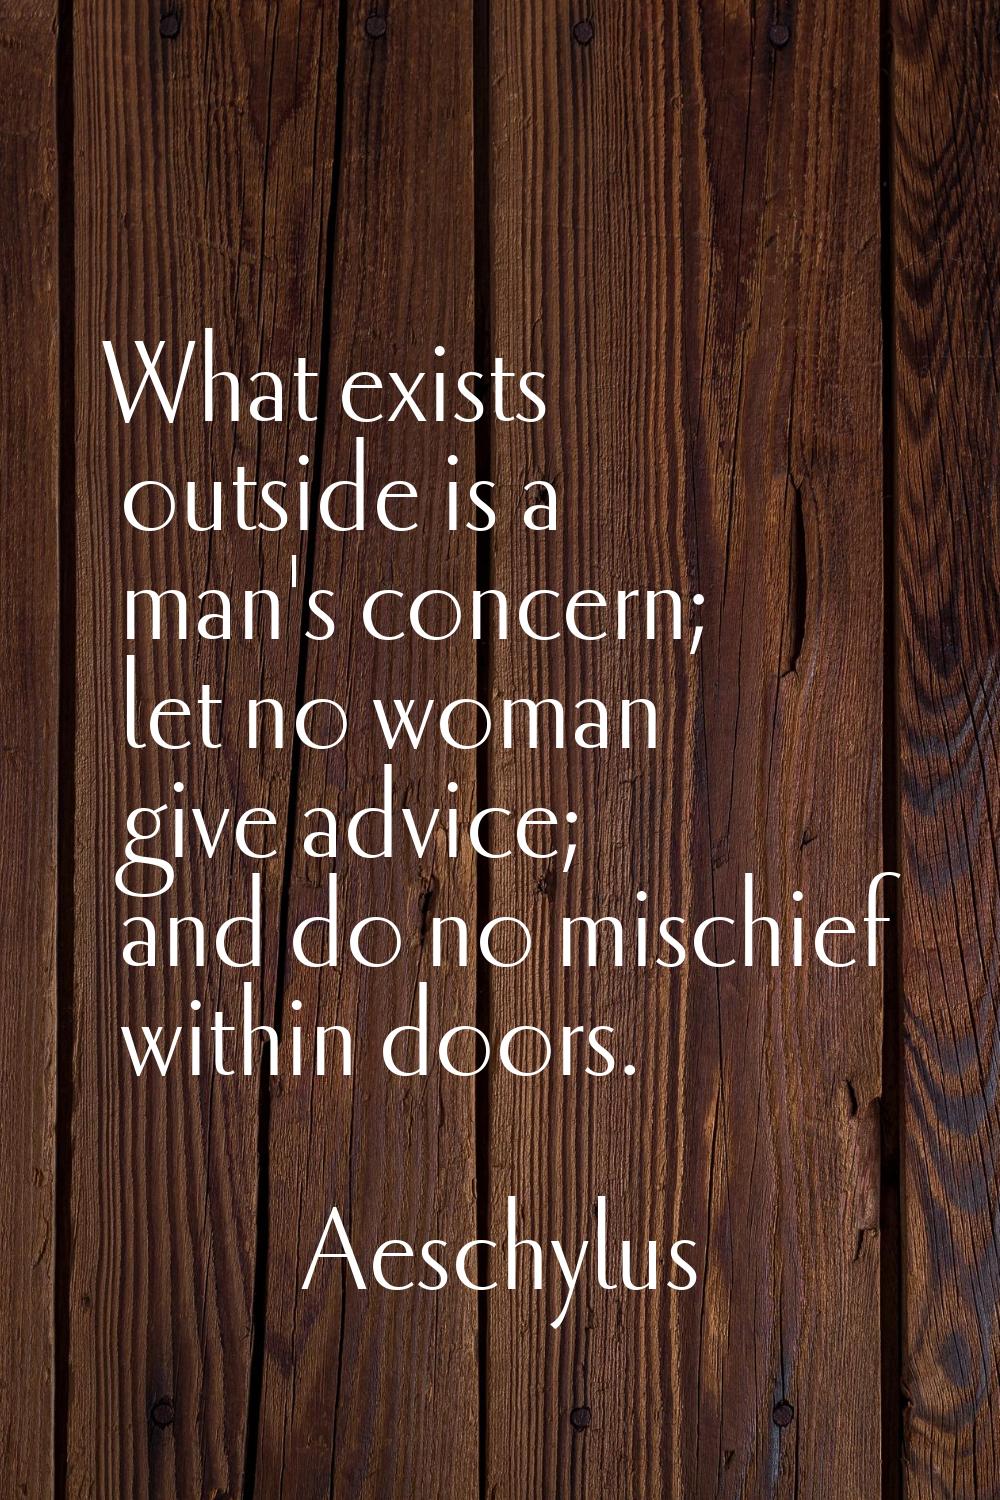 What exists outside is a man's concern; let no woman give advice; and do no mischief within doors.